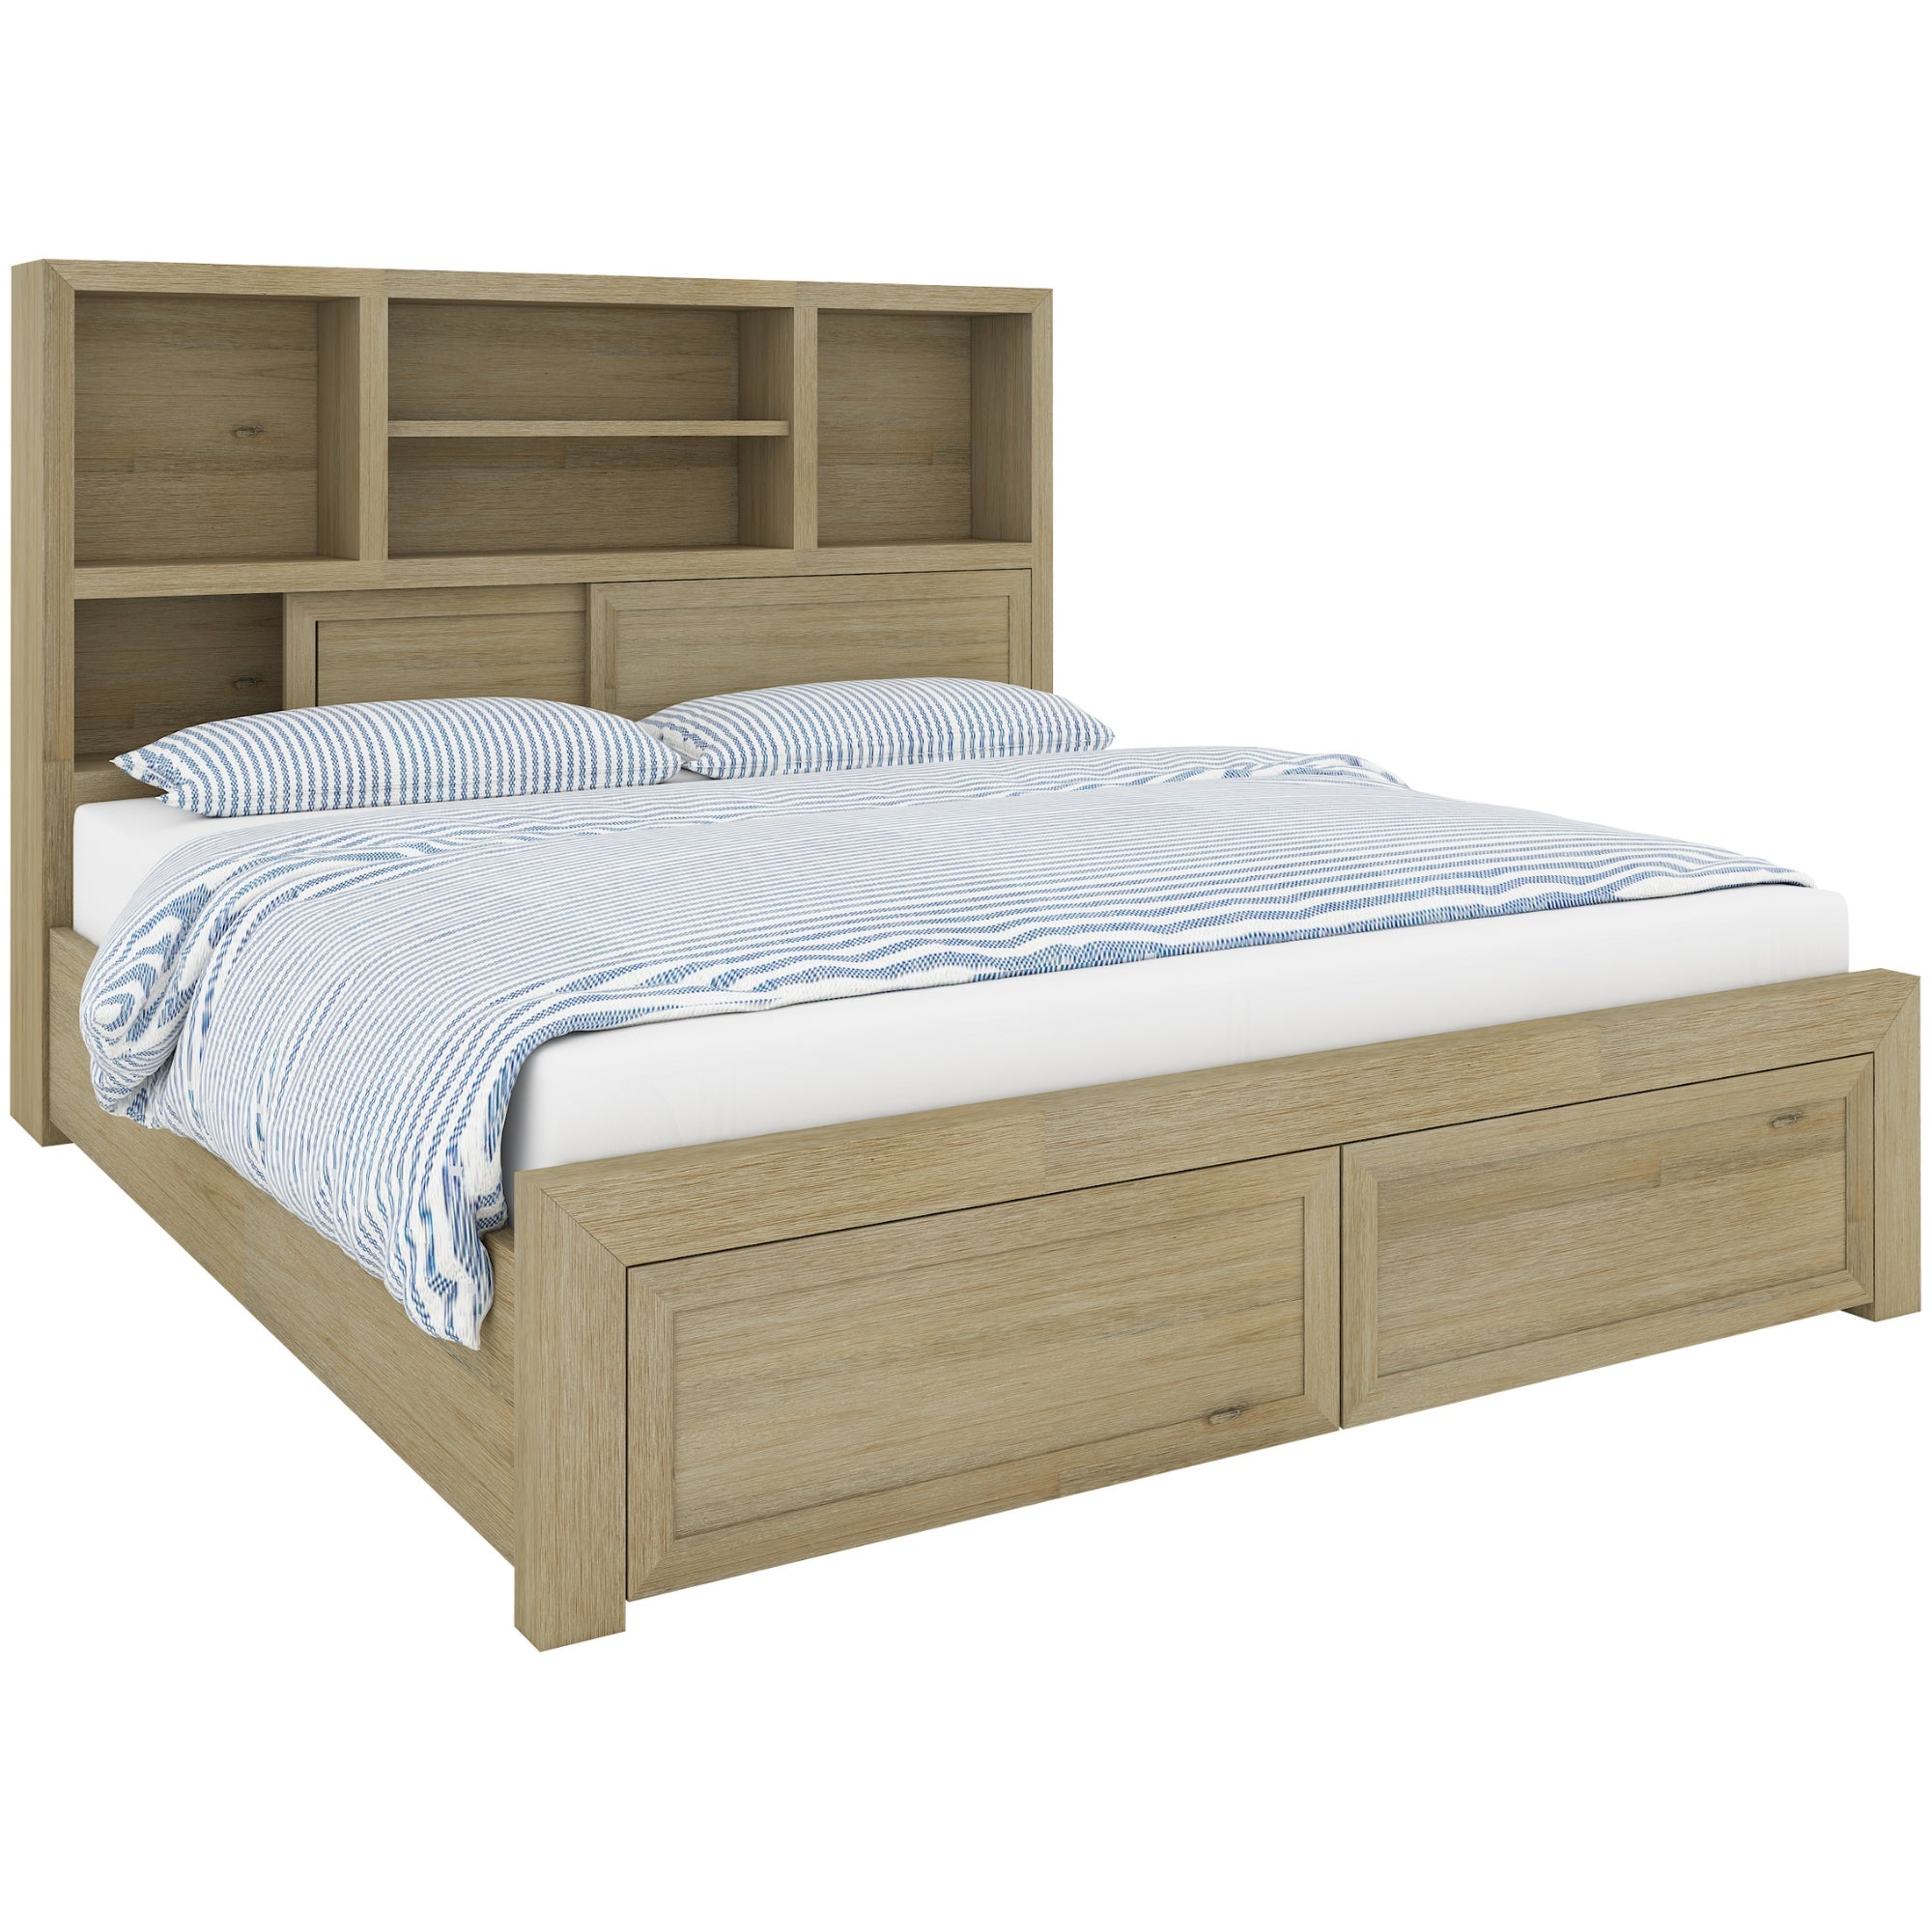 Gracelyn King Bed Frame Solid Wood Mattress Base With Storage Drawers - Smoke - SILBERSHELL